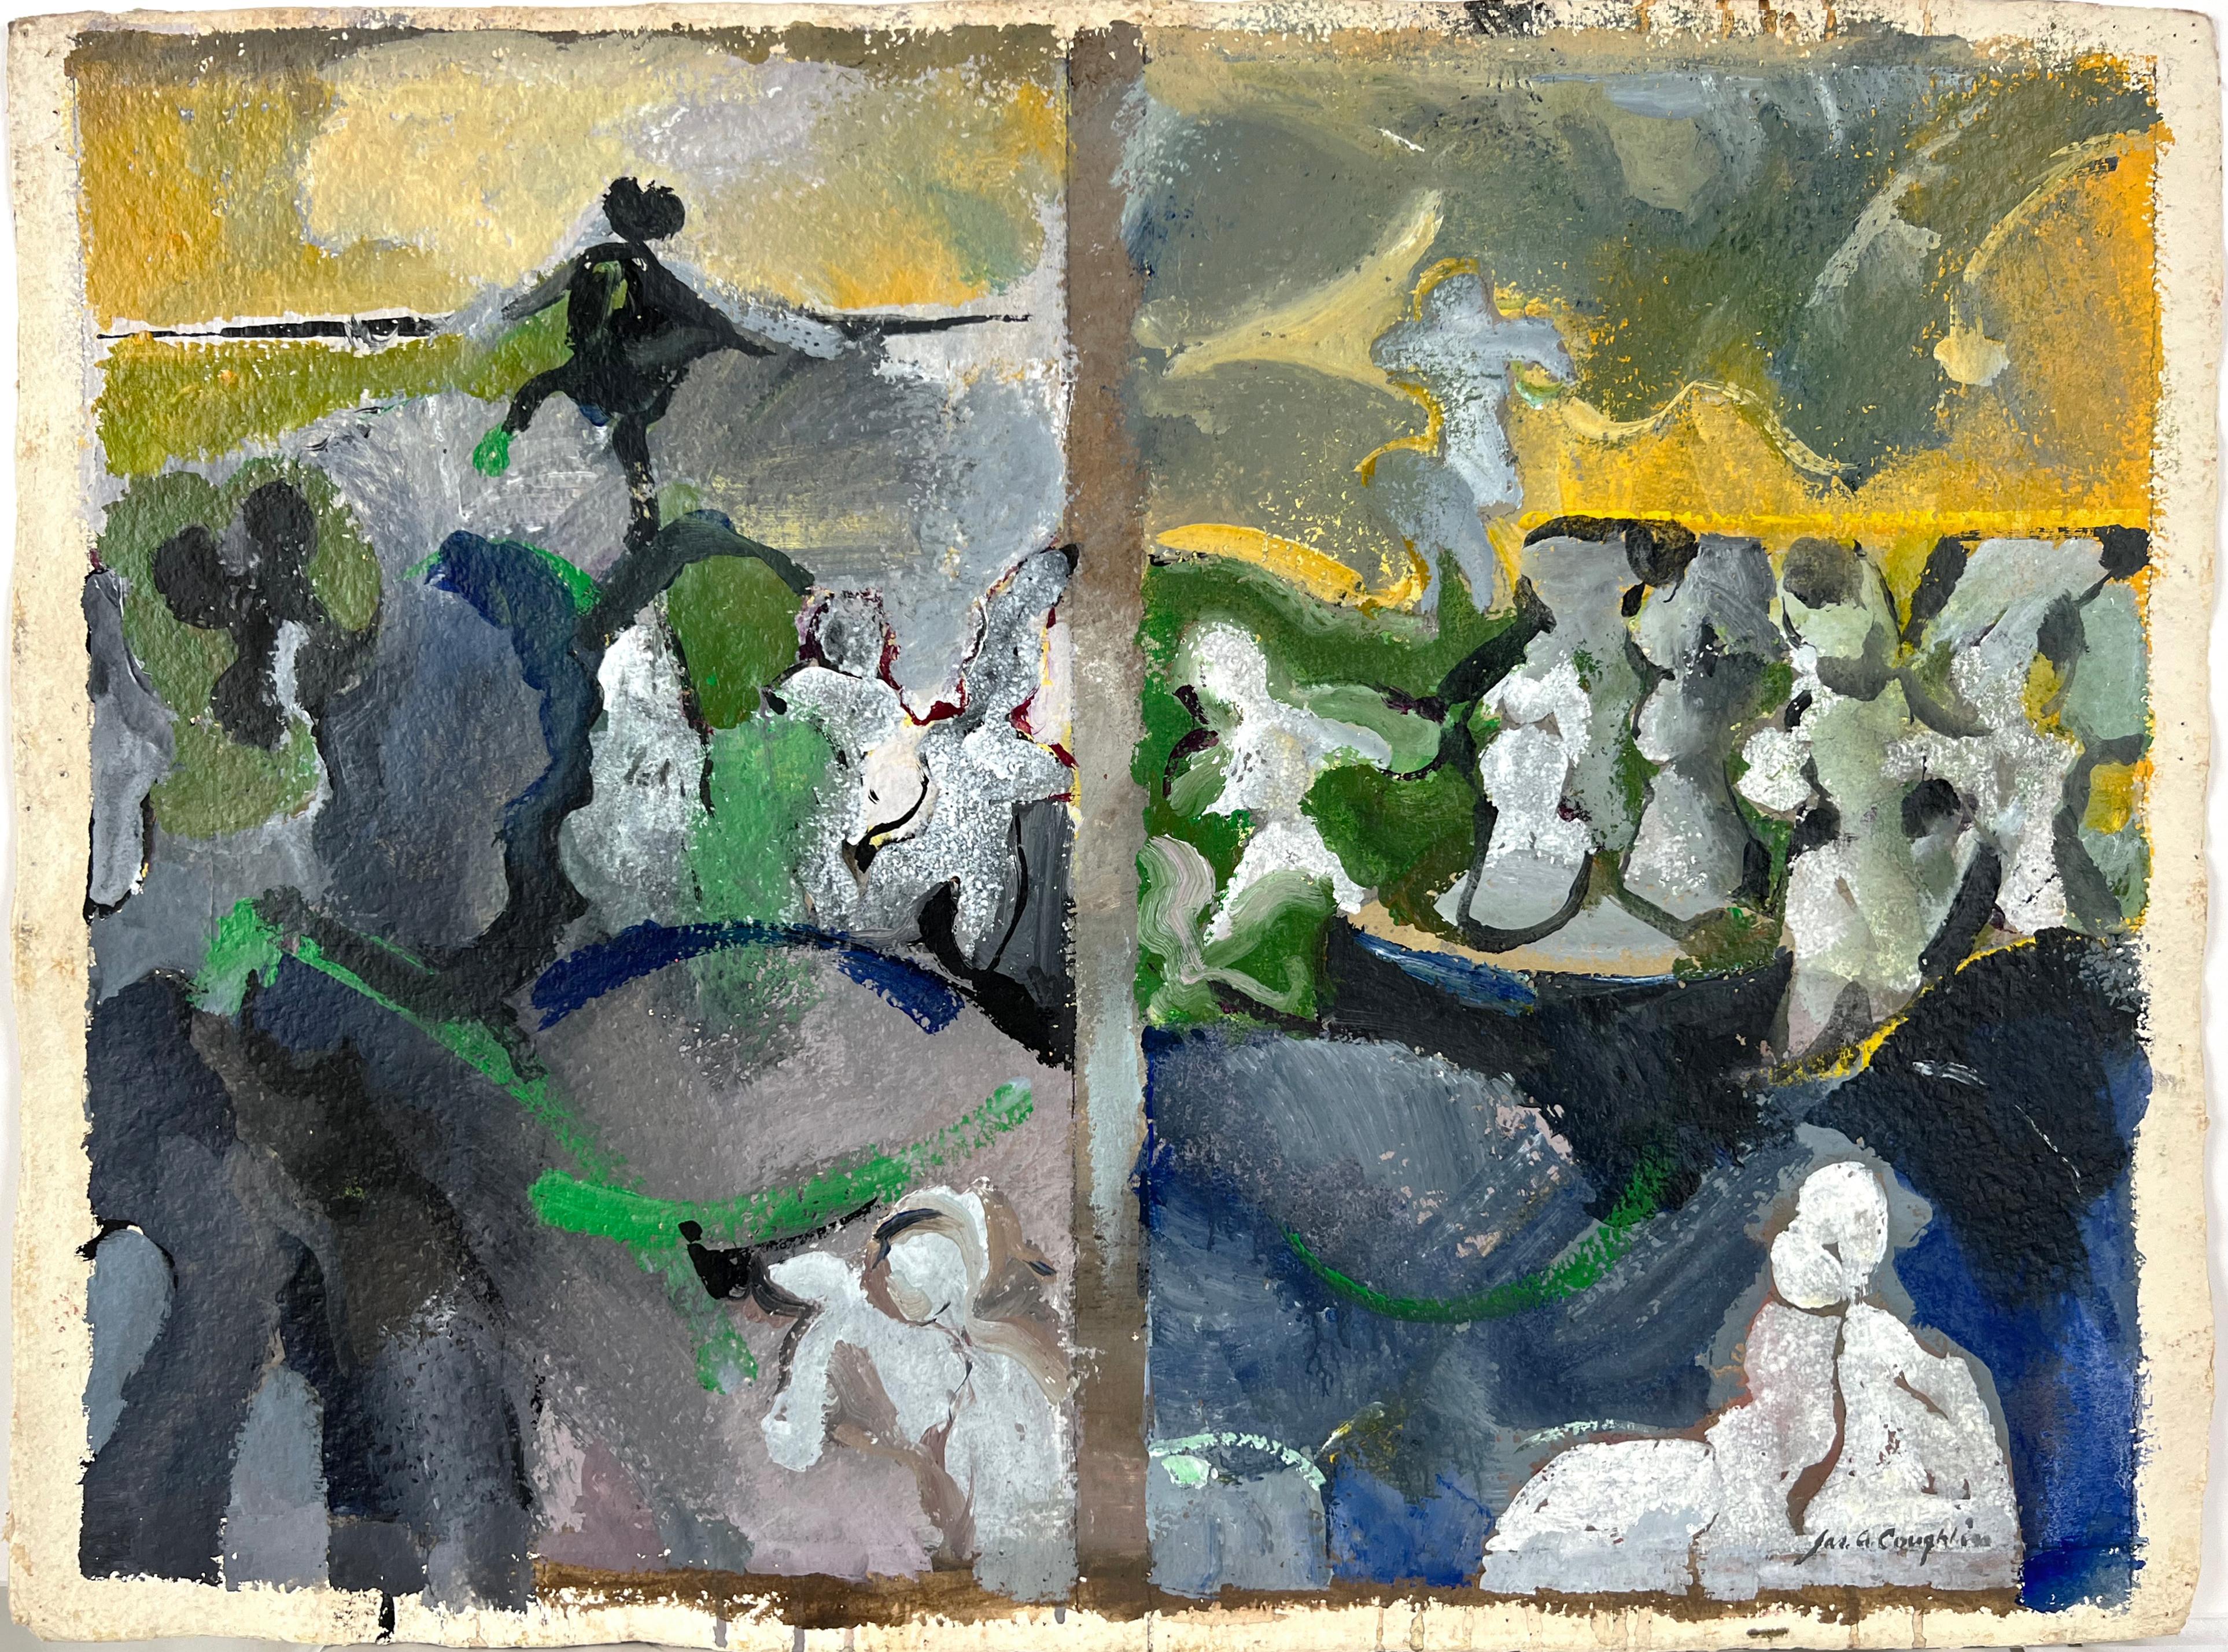 Abstract Figural and Pediments - Two Sided Art 
Mid century figural and architectural painting on paper. Heavy layers of paint with a dog on an abutment and two Japanese wrestlers in a floating suspension to the elements. Grey, blue and green